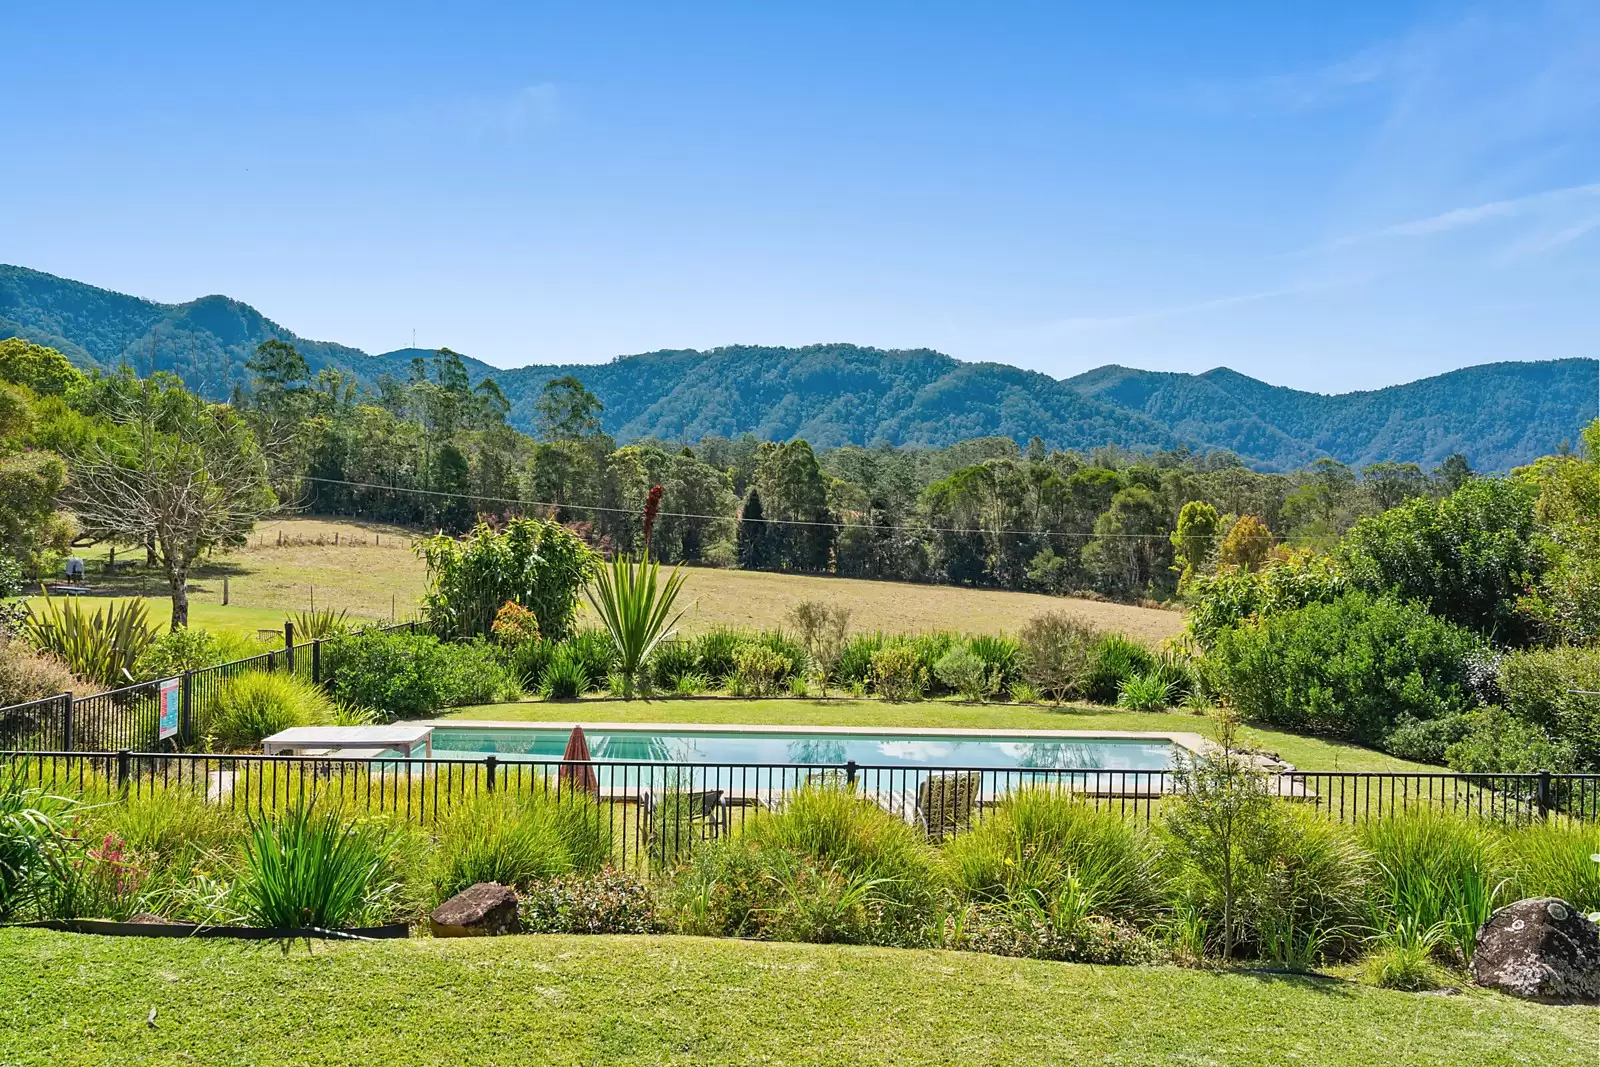 Photo #7: 1090 Promised Land Road, Bellingen - Sold by Sydney Sotheby's International Realty